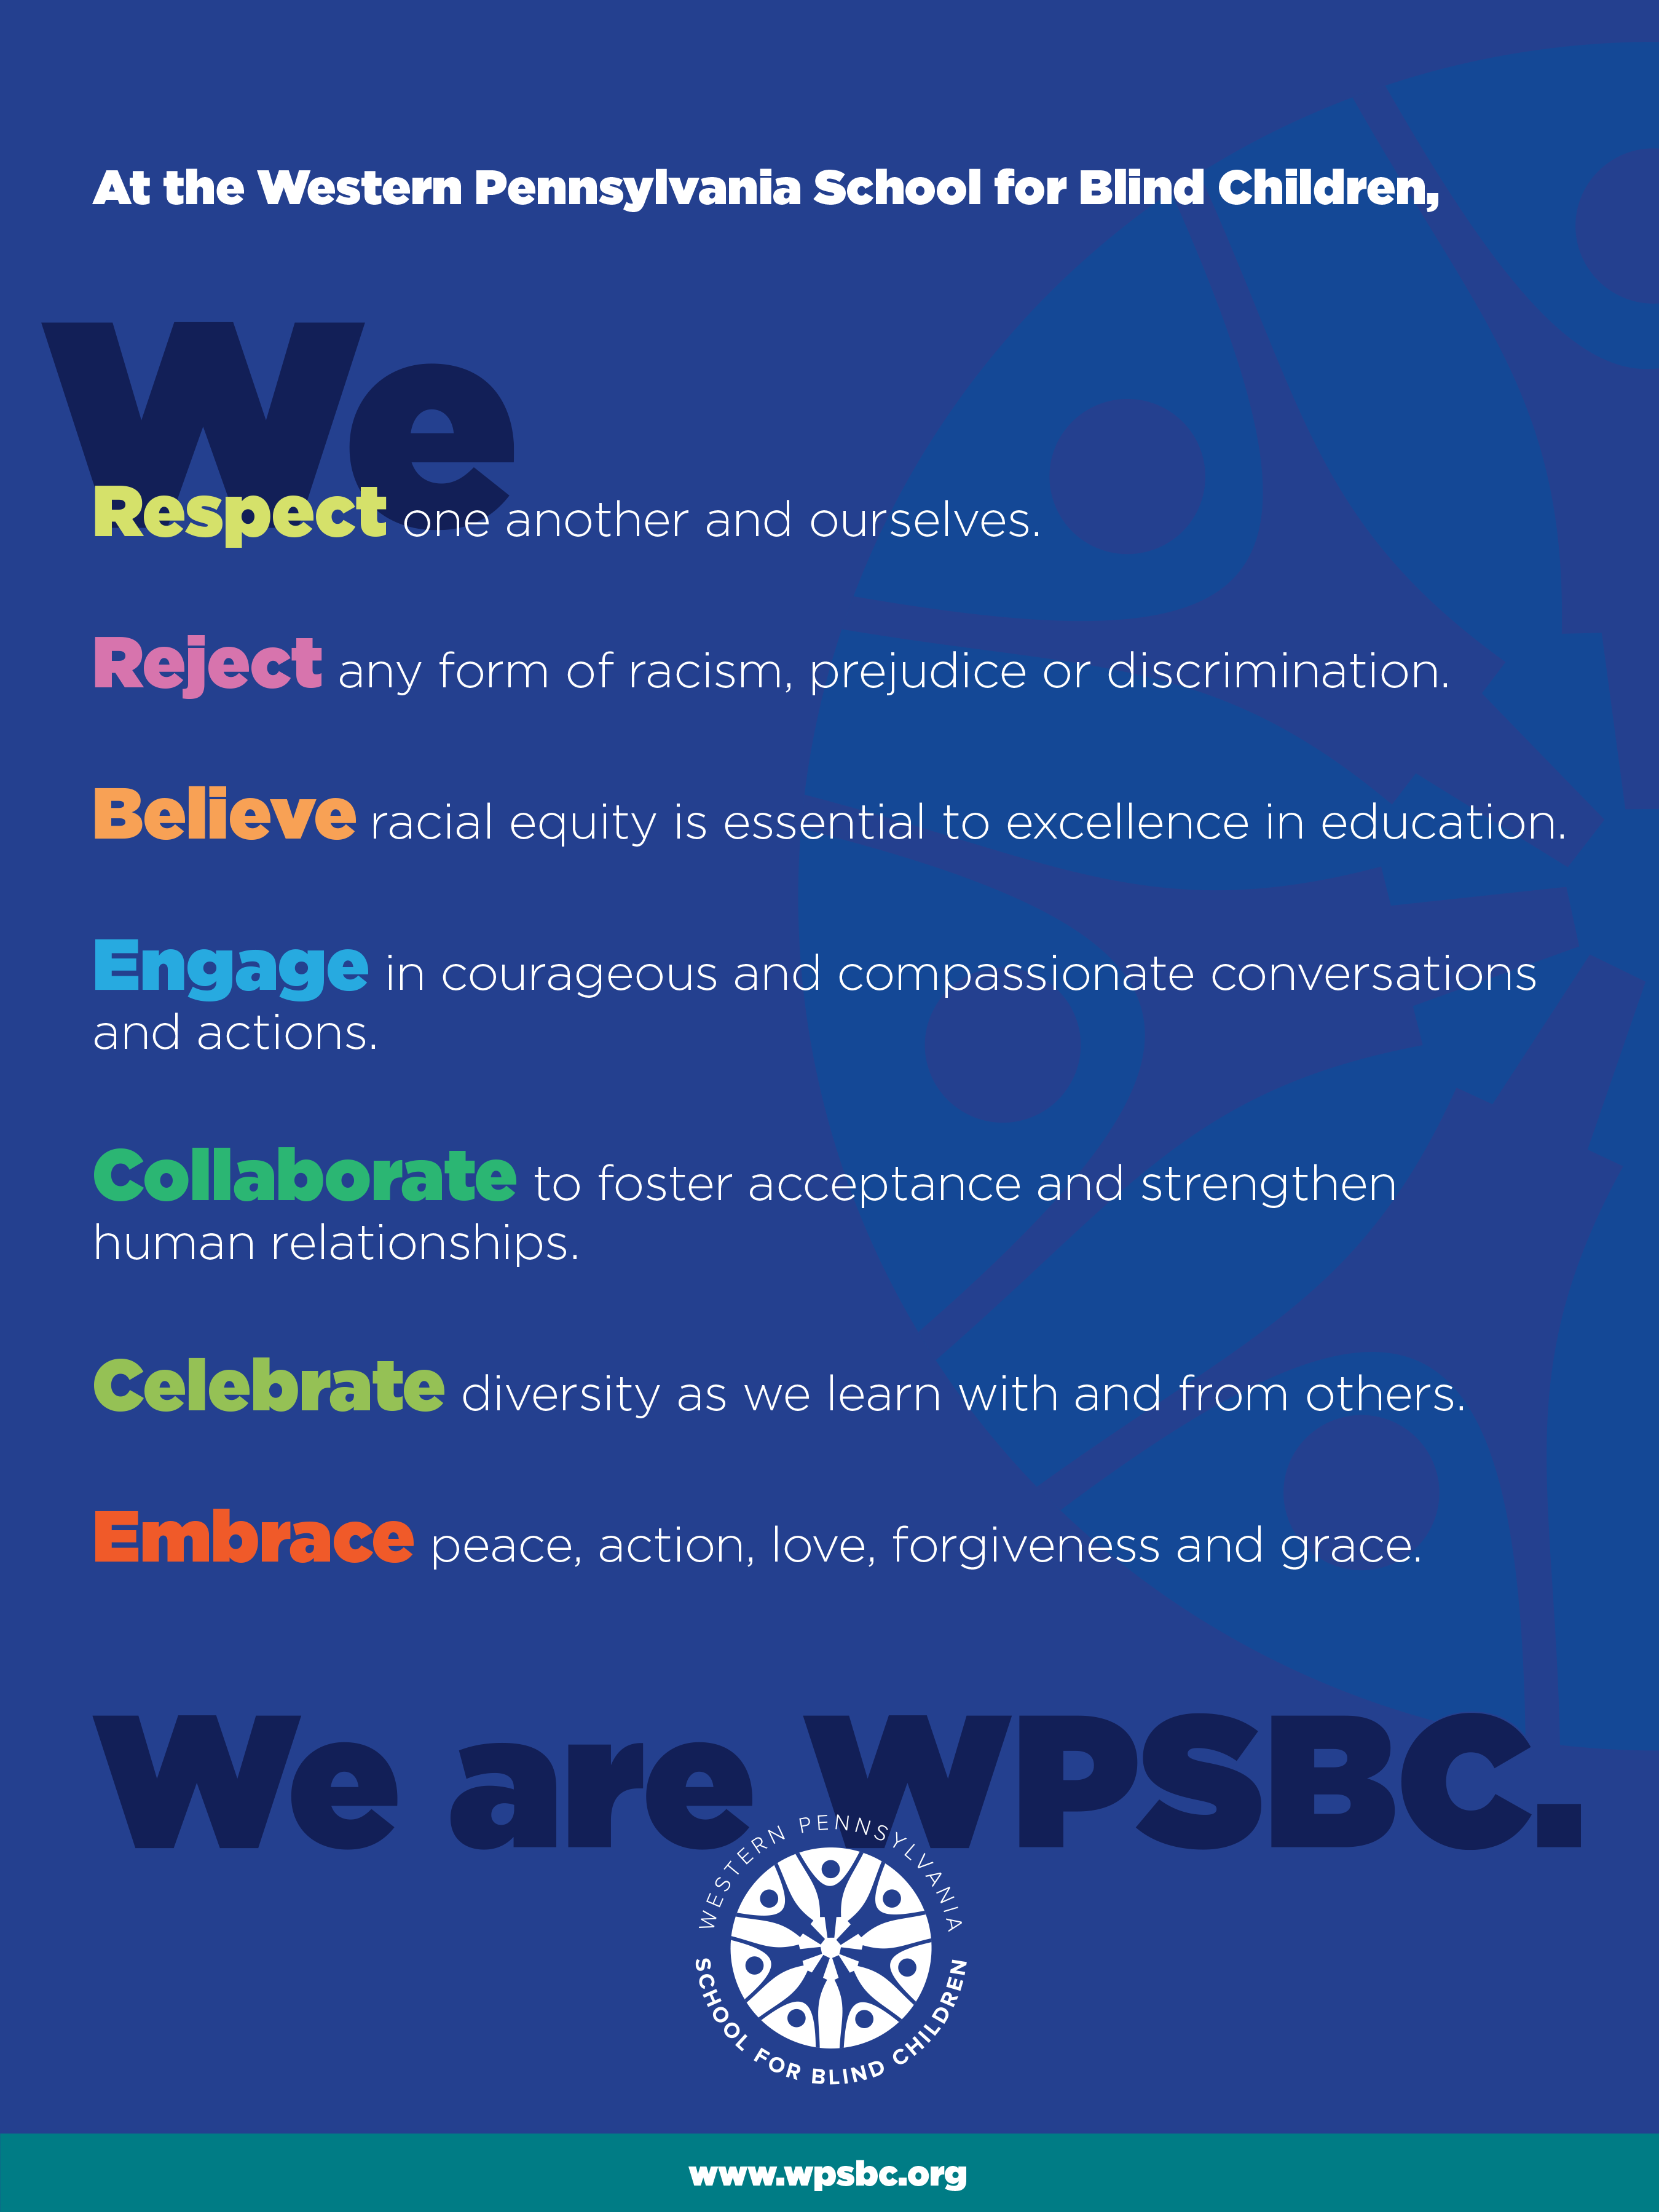 "At the Western Pennsylvania School for Blind Children, we respect one another and ourselves. We reject any form of racism, prejudice or discrimination. We believe racial equality is essential to excellence in education. We engage in courageous and compassionate conversations and actions. We collaborate to foster acceptance and strengthen human relationships. We celebrate diversity as we learn with and from others. We embrace peace, action, love, forgiveness and grace. We are WPSBC."